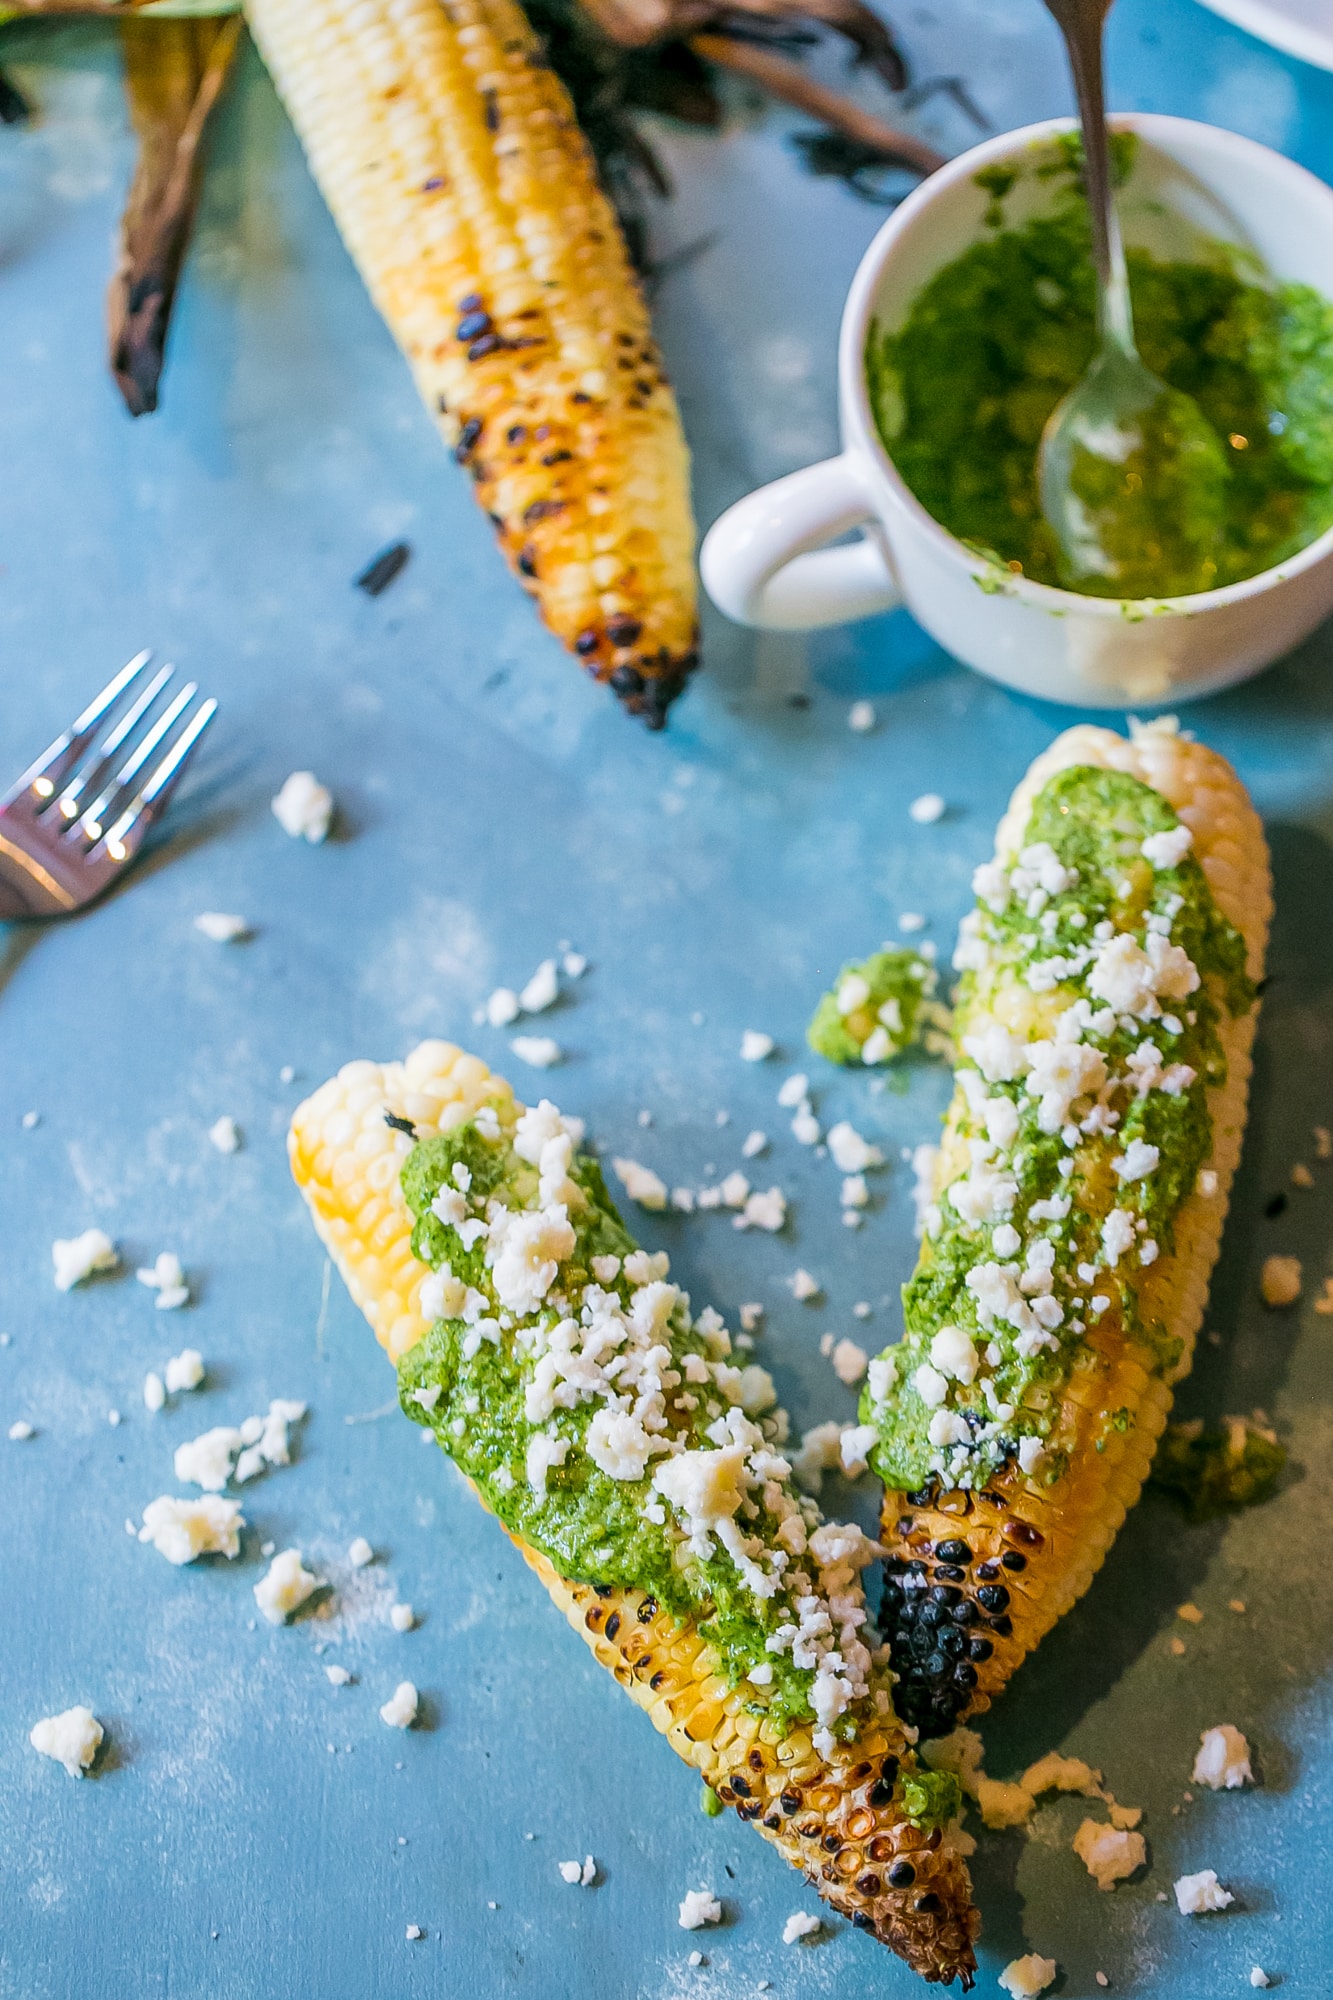 grilled corn with green pesto and crumbled cheese on it, mug of pesto in the background